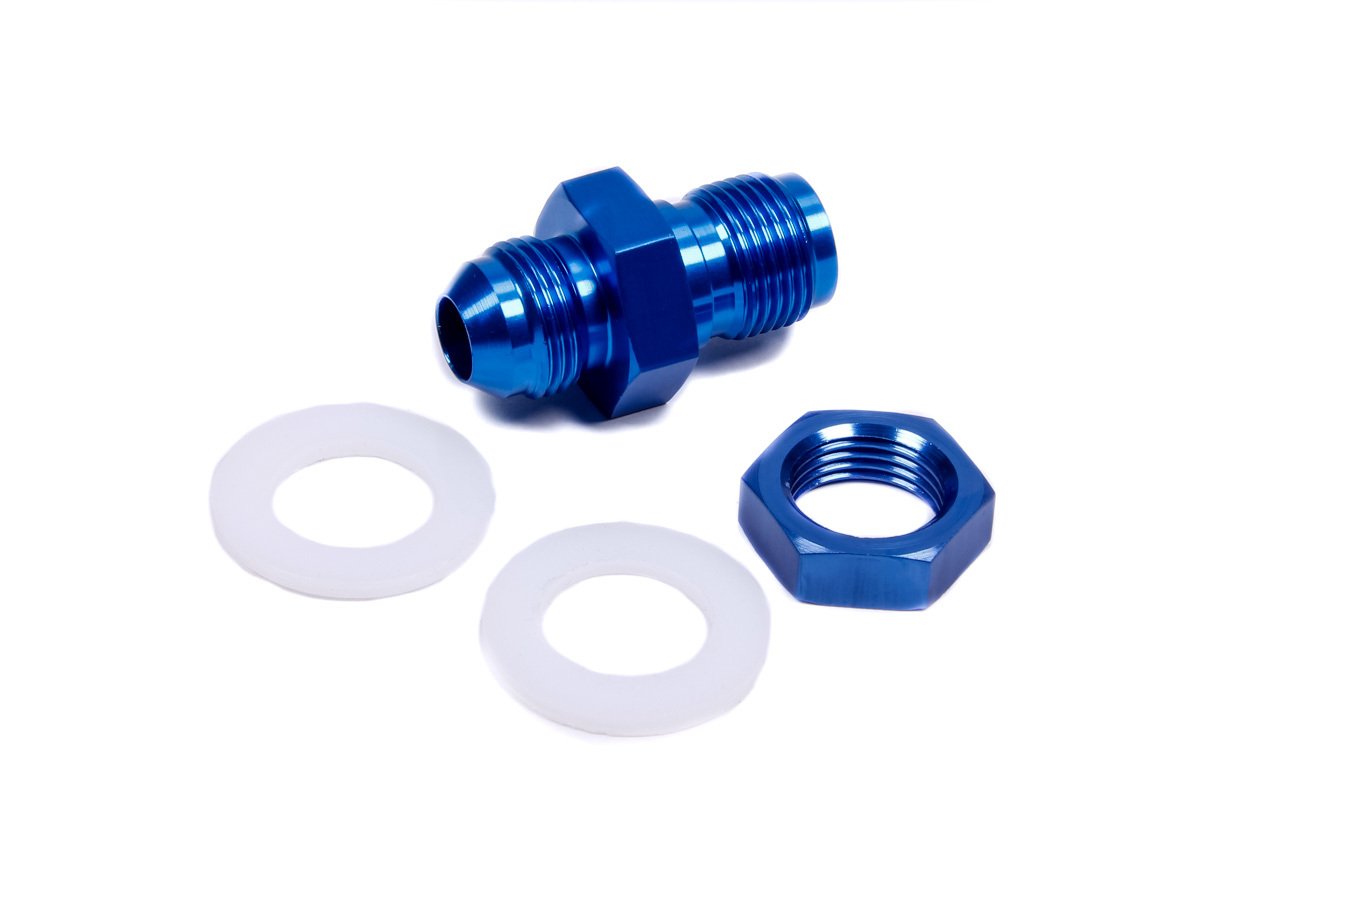 JAZ Products 832-108-11 Fitting, Bulkhead, Straight, 8 AN Male to 8 AN Male Bulkhead, PTFE Gaskets Included, Aluminum, Blue Anodized, JAZ Fast Flow Fuel Cells, Each